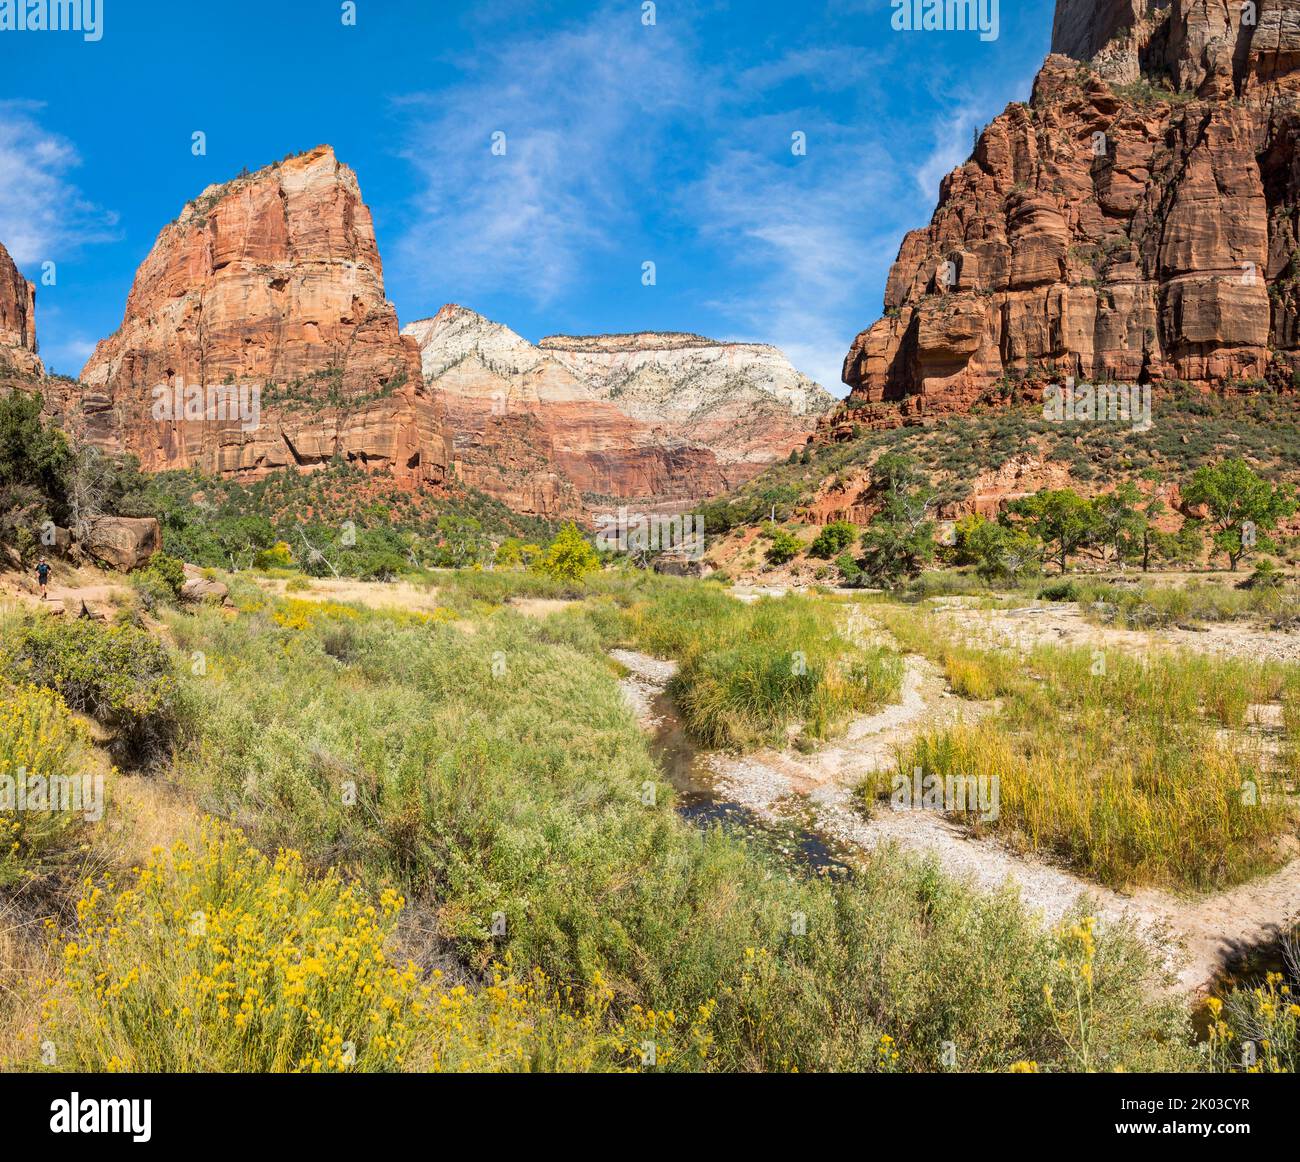 Zion National Park is located in southwestern Utah on the border with Arizona. It has an area of 579 kö² and lies between 1128 m and 2660 m altitude. Landscape in Zion Canyon on the West Rim Trail. View up the valley to Angels Landing. Stock Photo